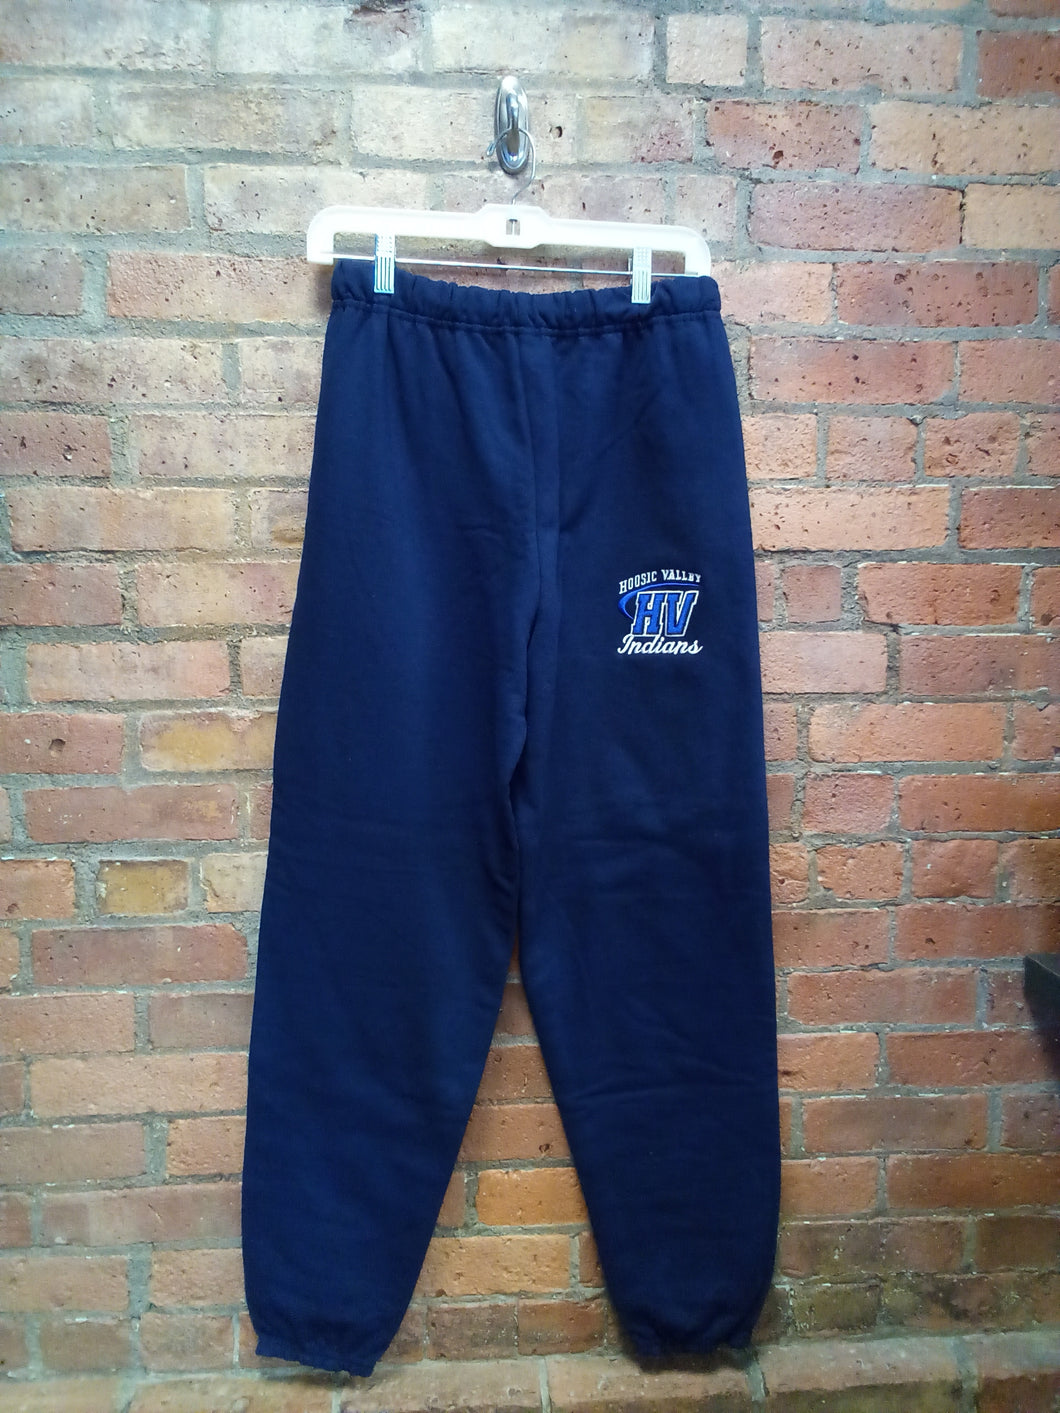 CLEARANCE - Hoosic Valley Indians Navy Sweatpants - Size Small